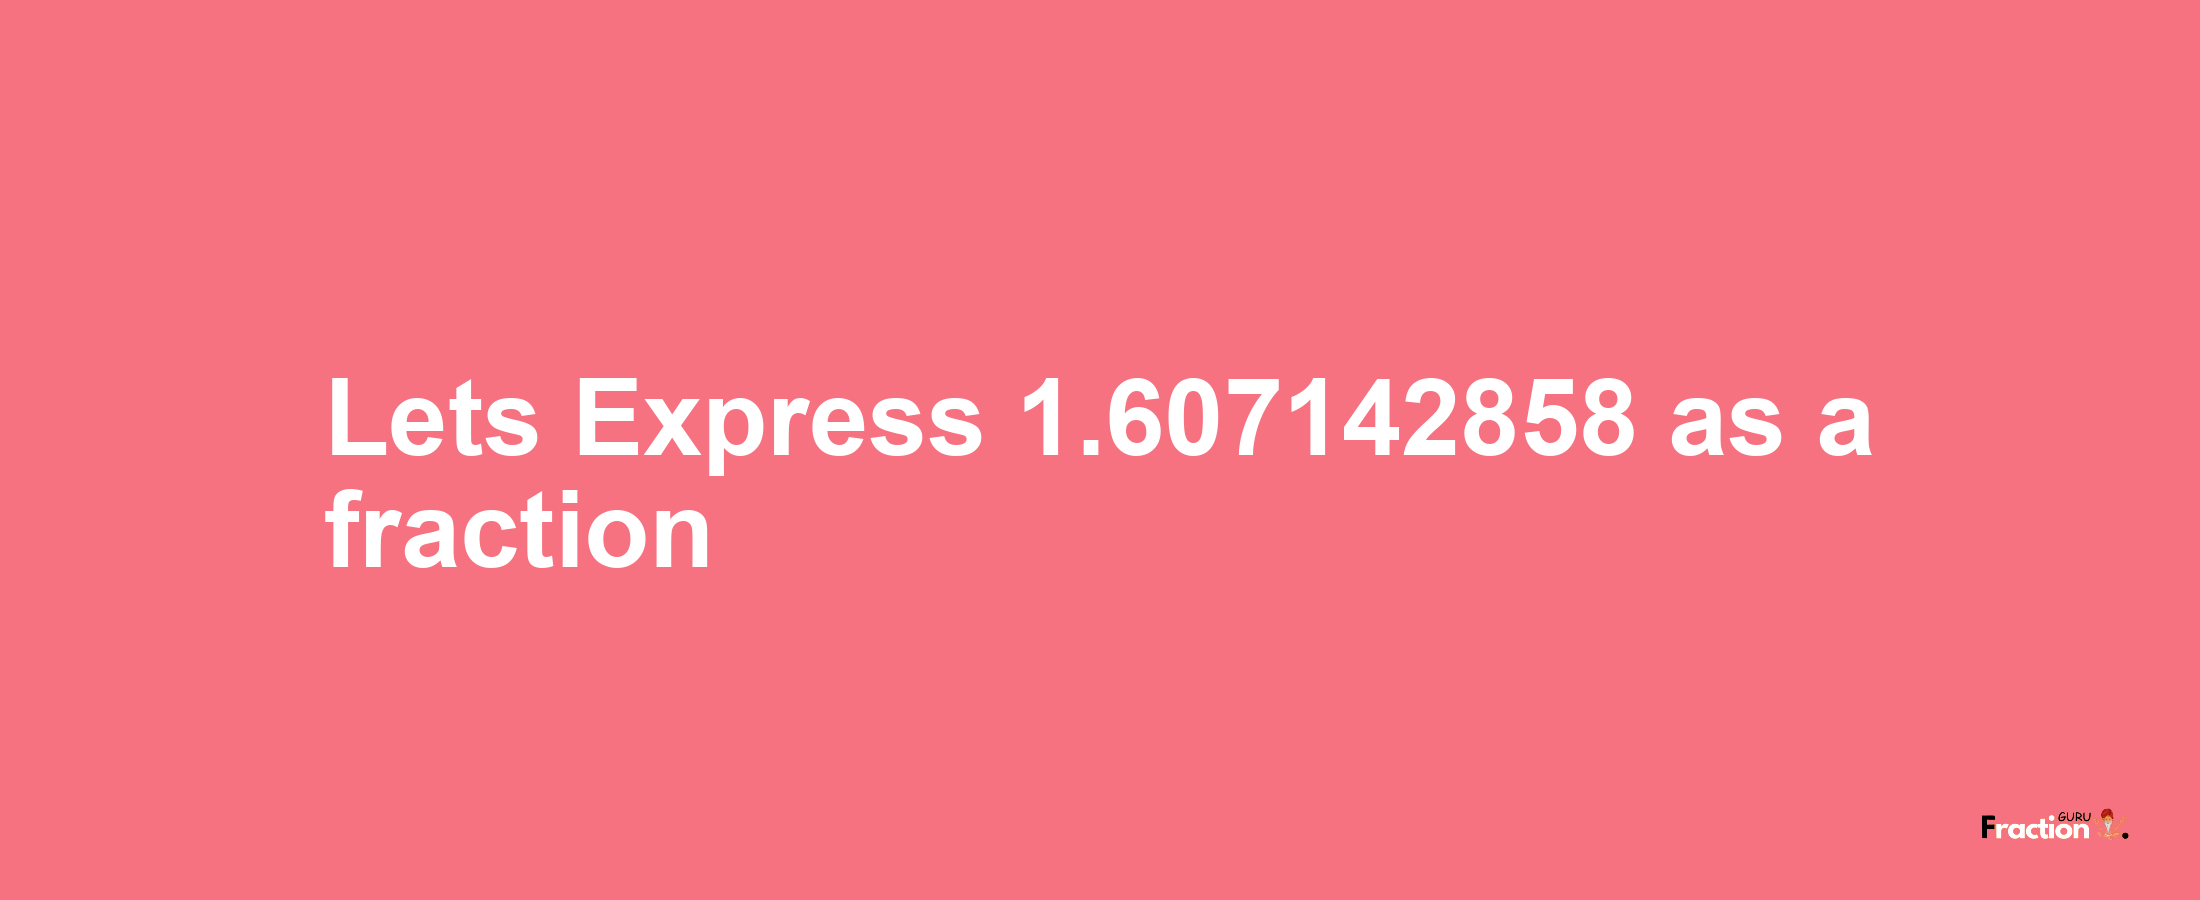 Lets Express 1.607142858 as afraction